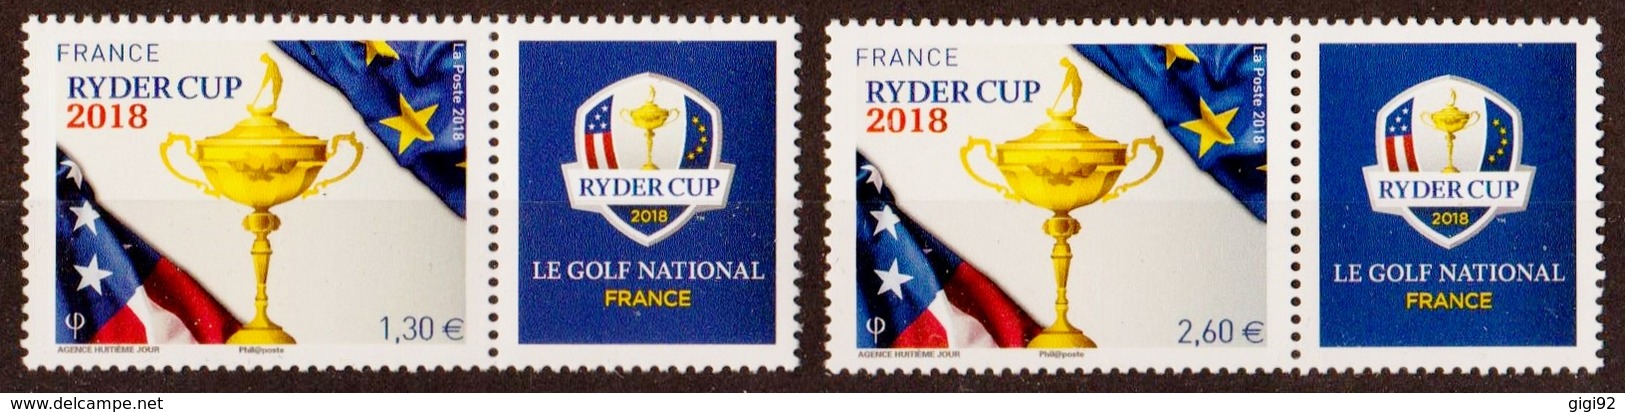 2018  Timbres Des  Feuillets  " Ryder Cup "  Neufs** SERIE COMPLETE - Neufs